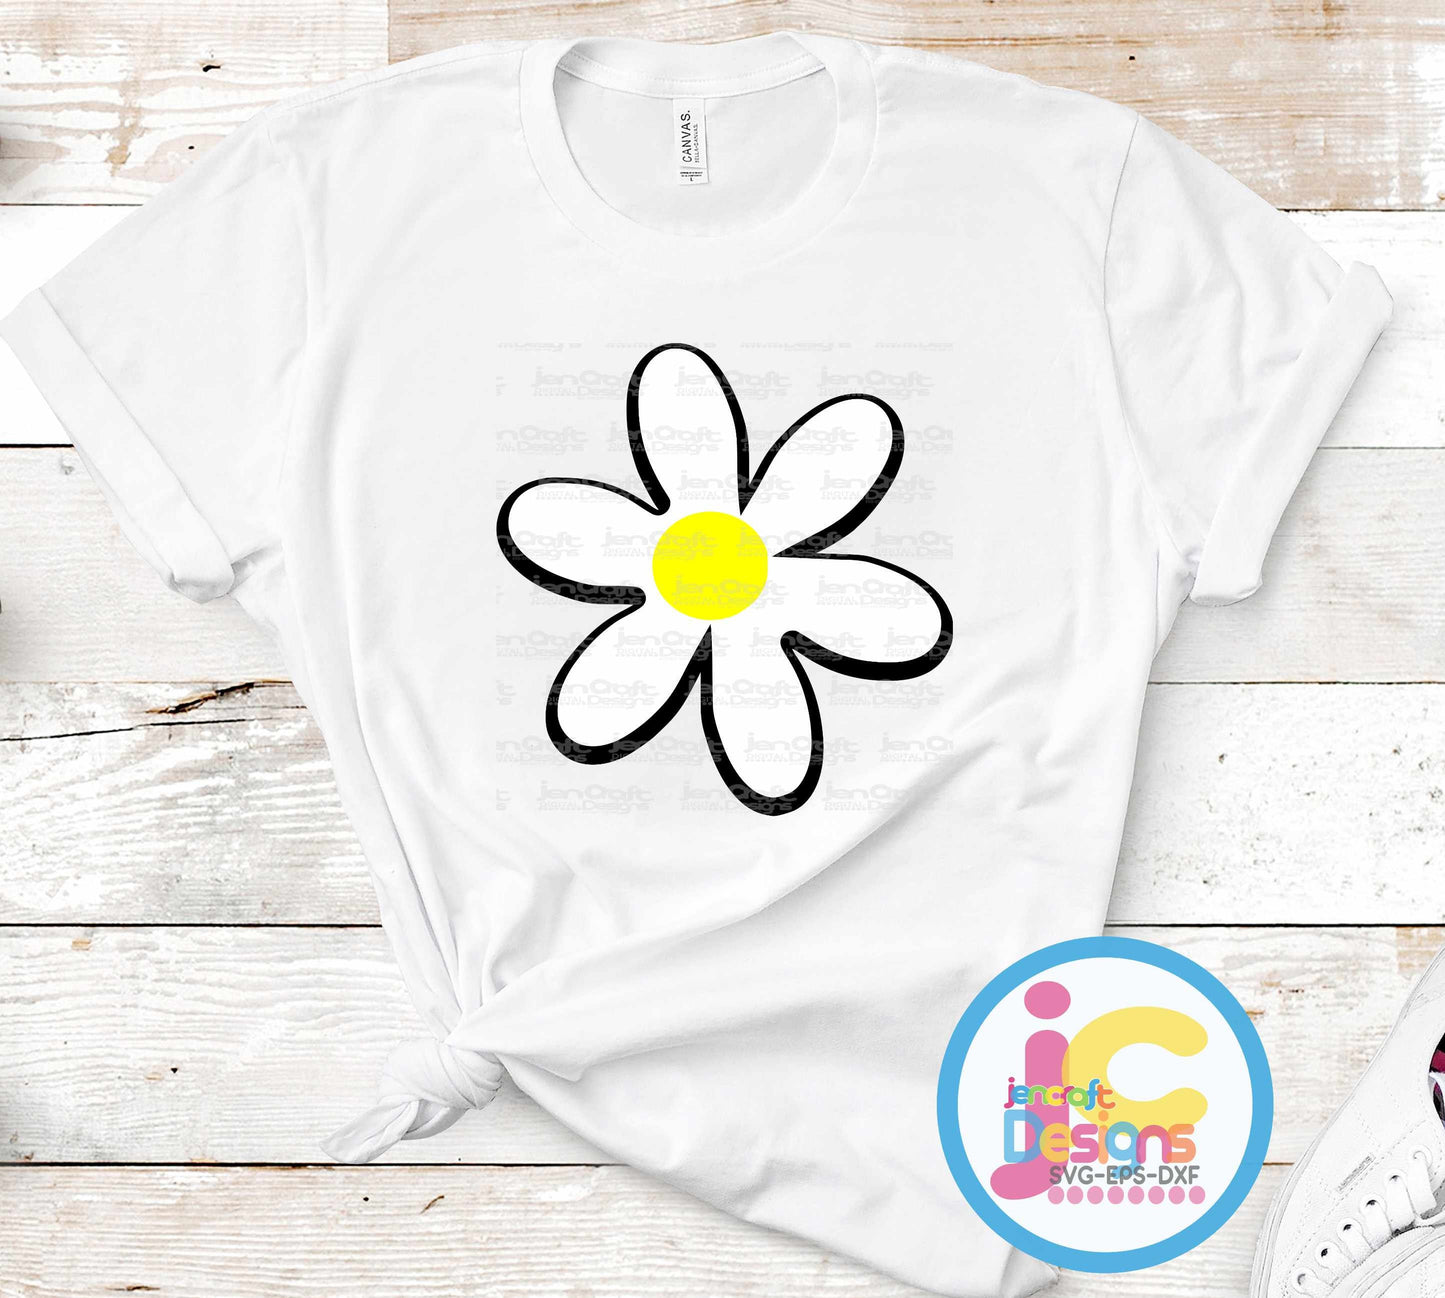 Daisy SVG, Wildflower Bundle, 30 Daisies cut files for retro shirt designs in Svg, Eps, Dxf, Png Cricut Silhouette floral clipart - JenCraft Designs